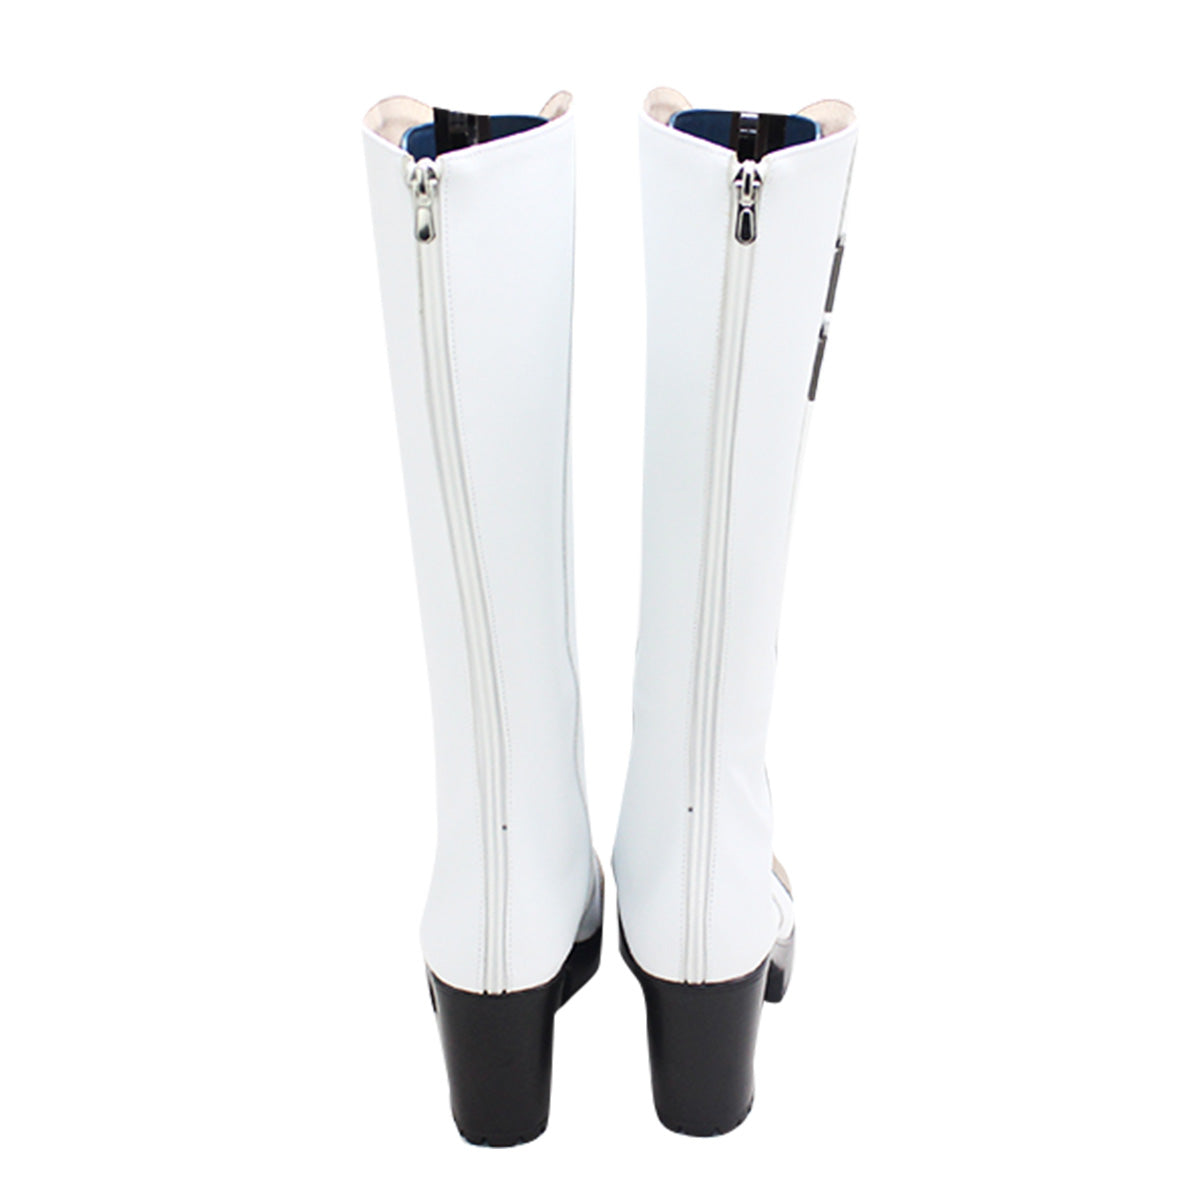 Jobless Reincarnation Migurdia Silver Shoes Cosplay Boots